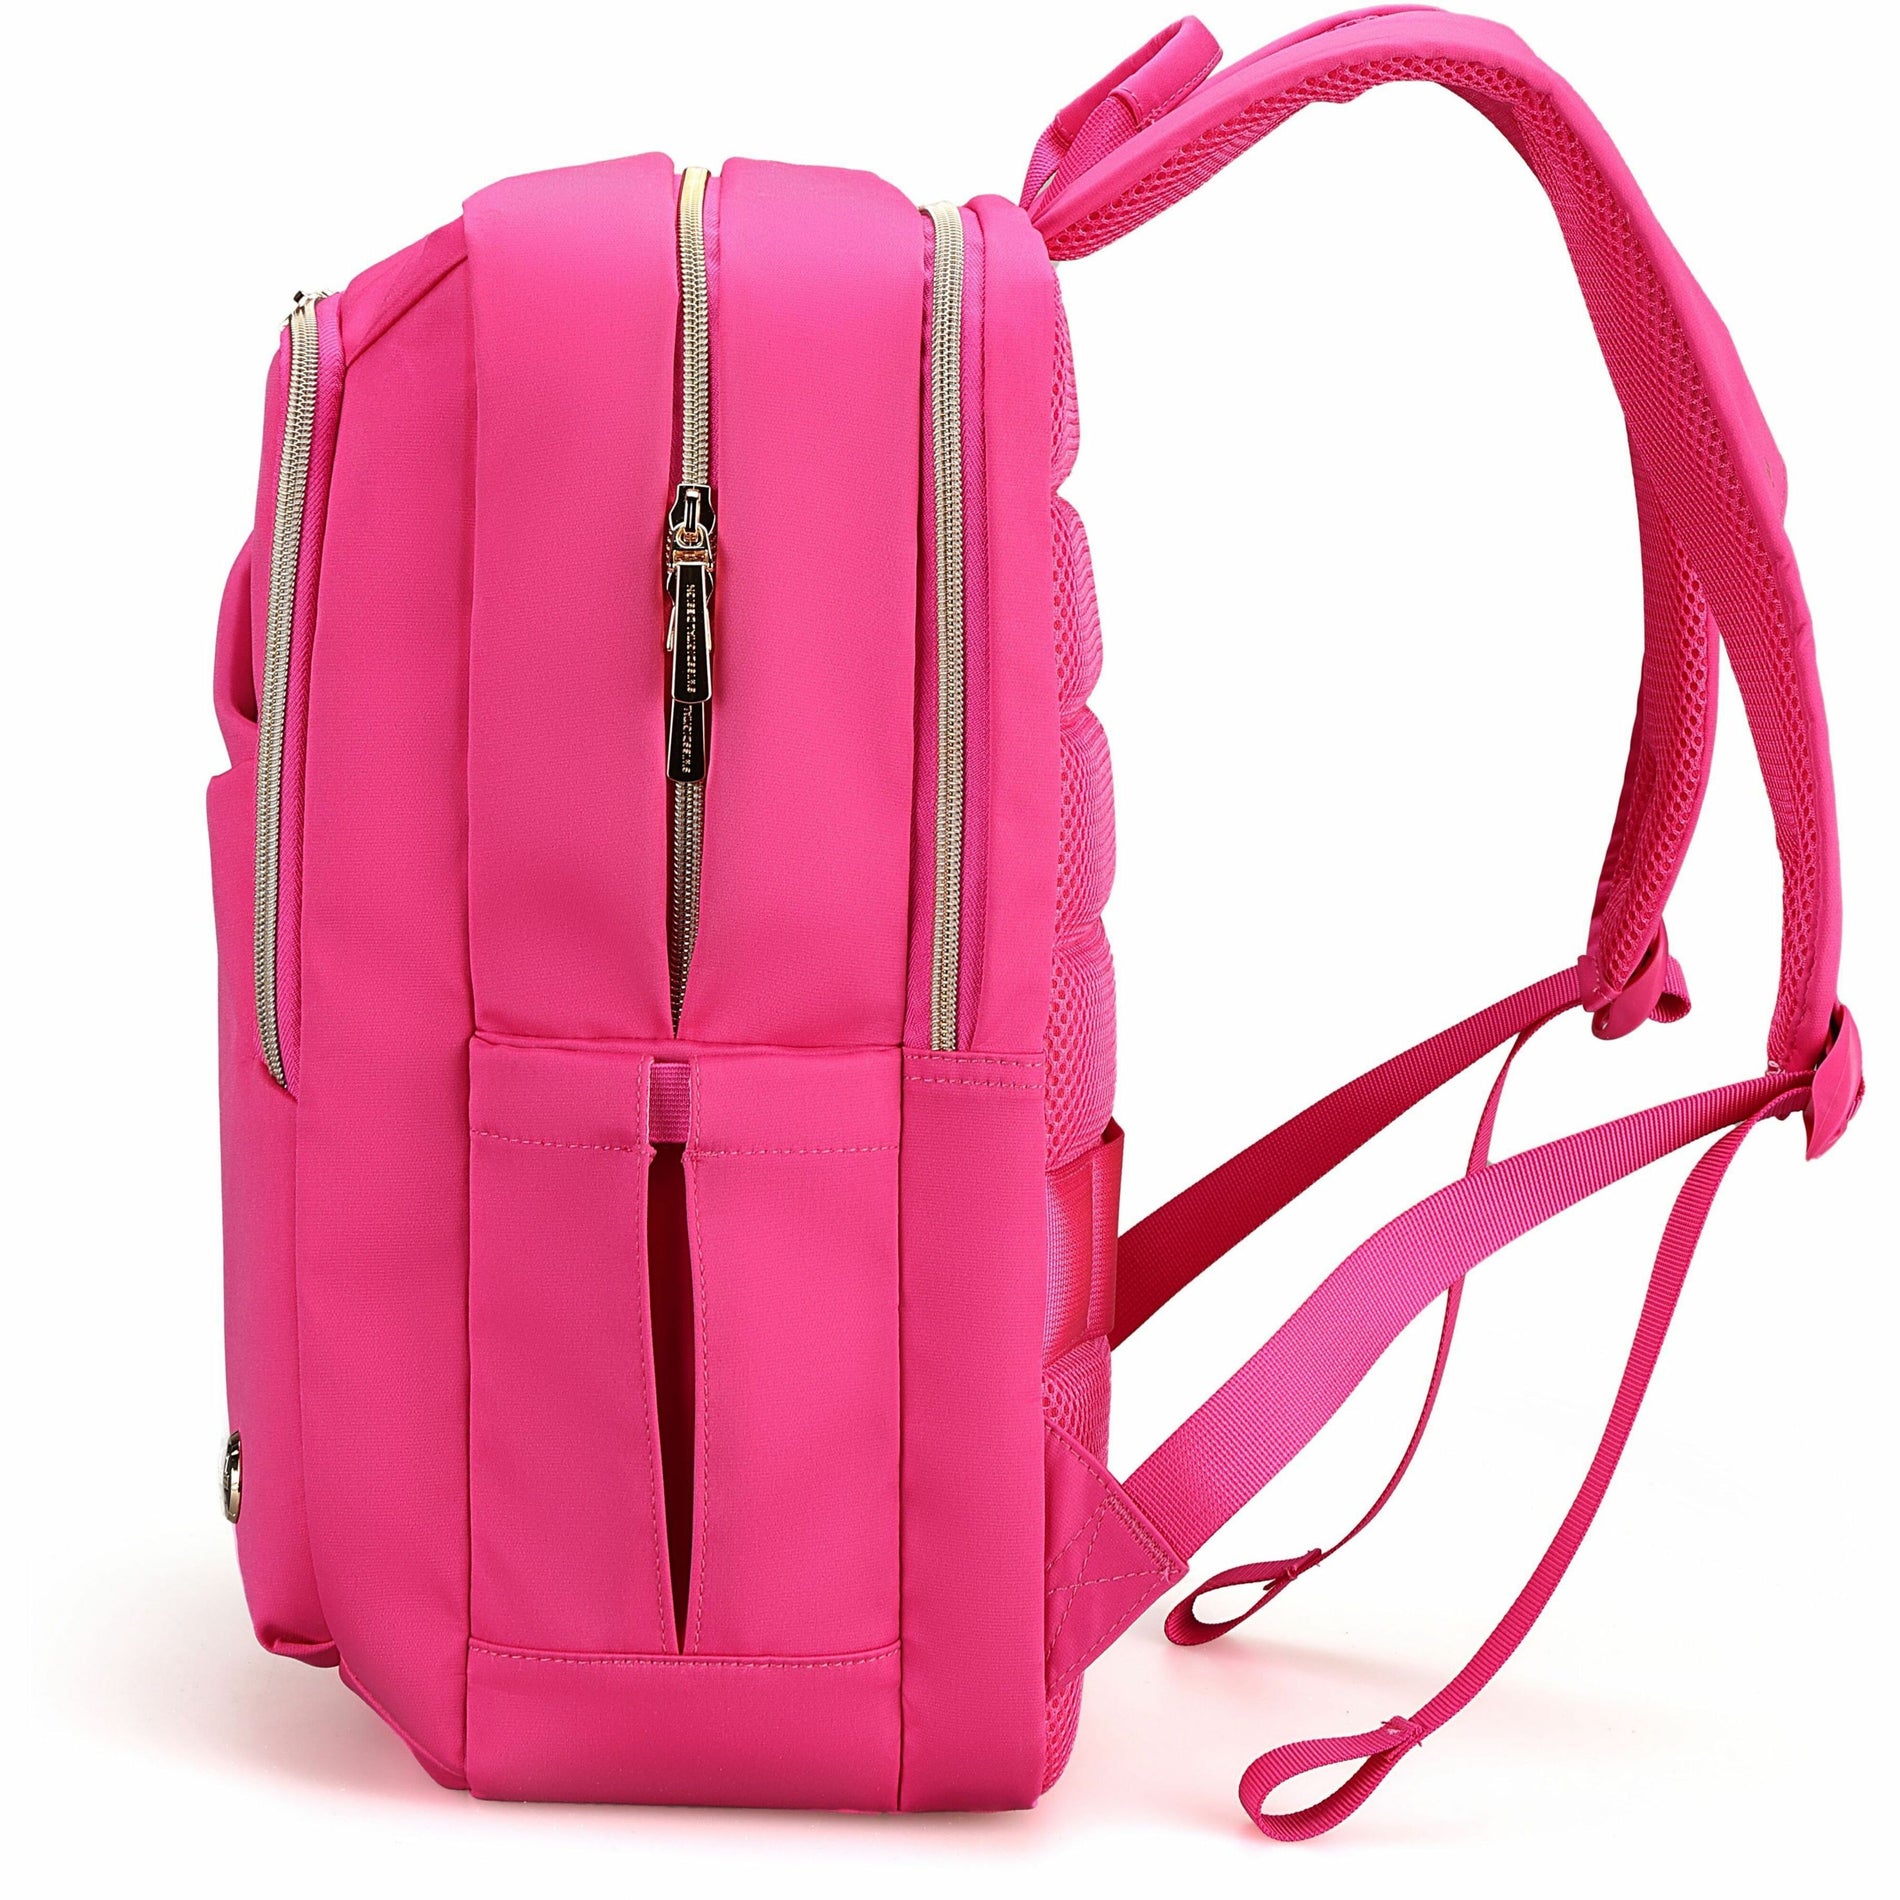 Swissdigital Design SD1645-46 Tablet Case, Katy Rose Fabric Backpack with Shoulder Strap and Luggage Strap